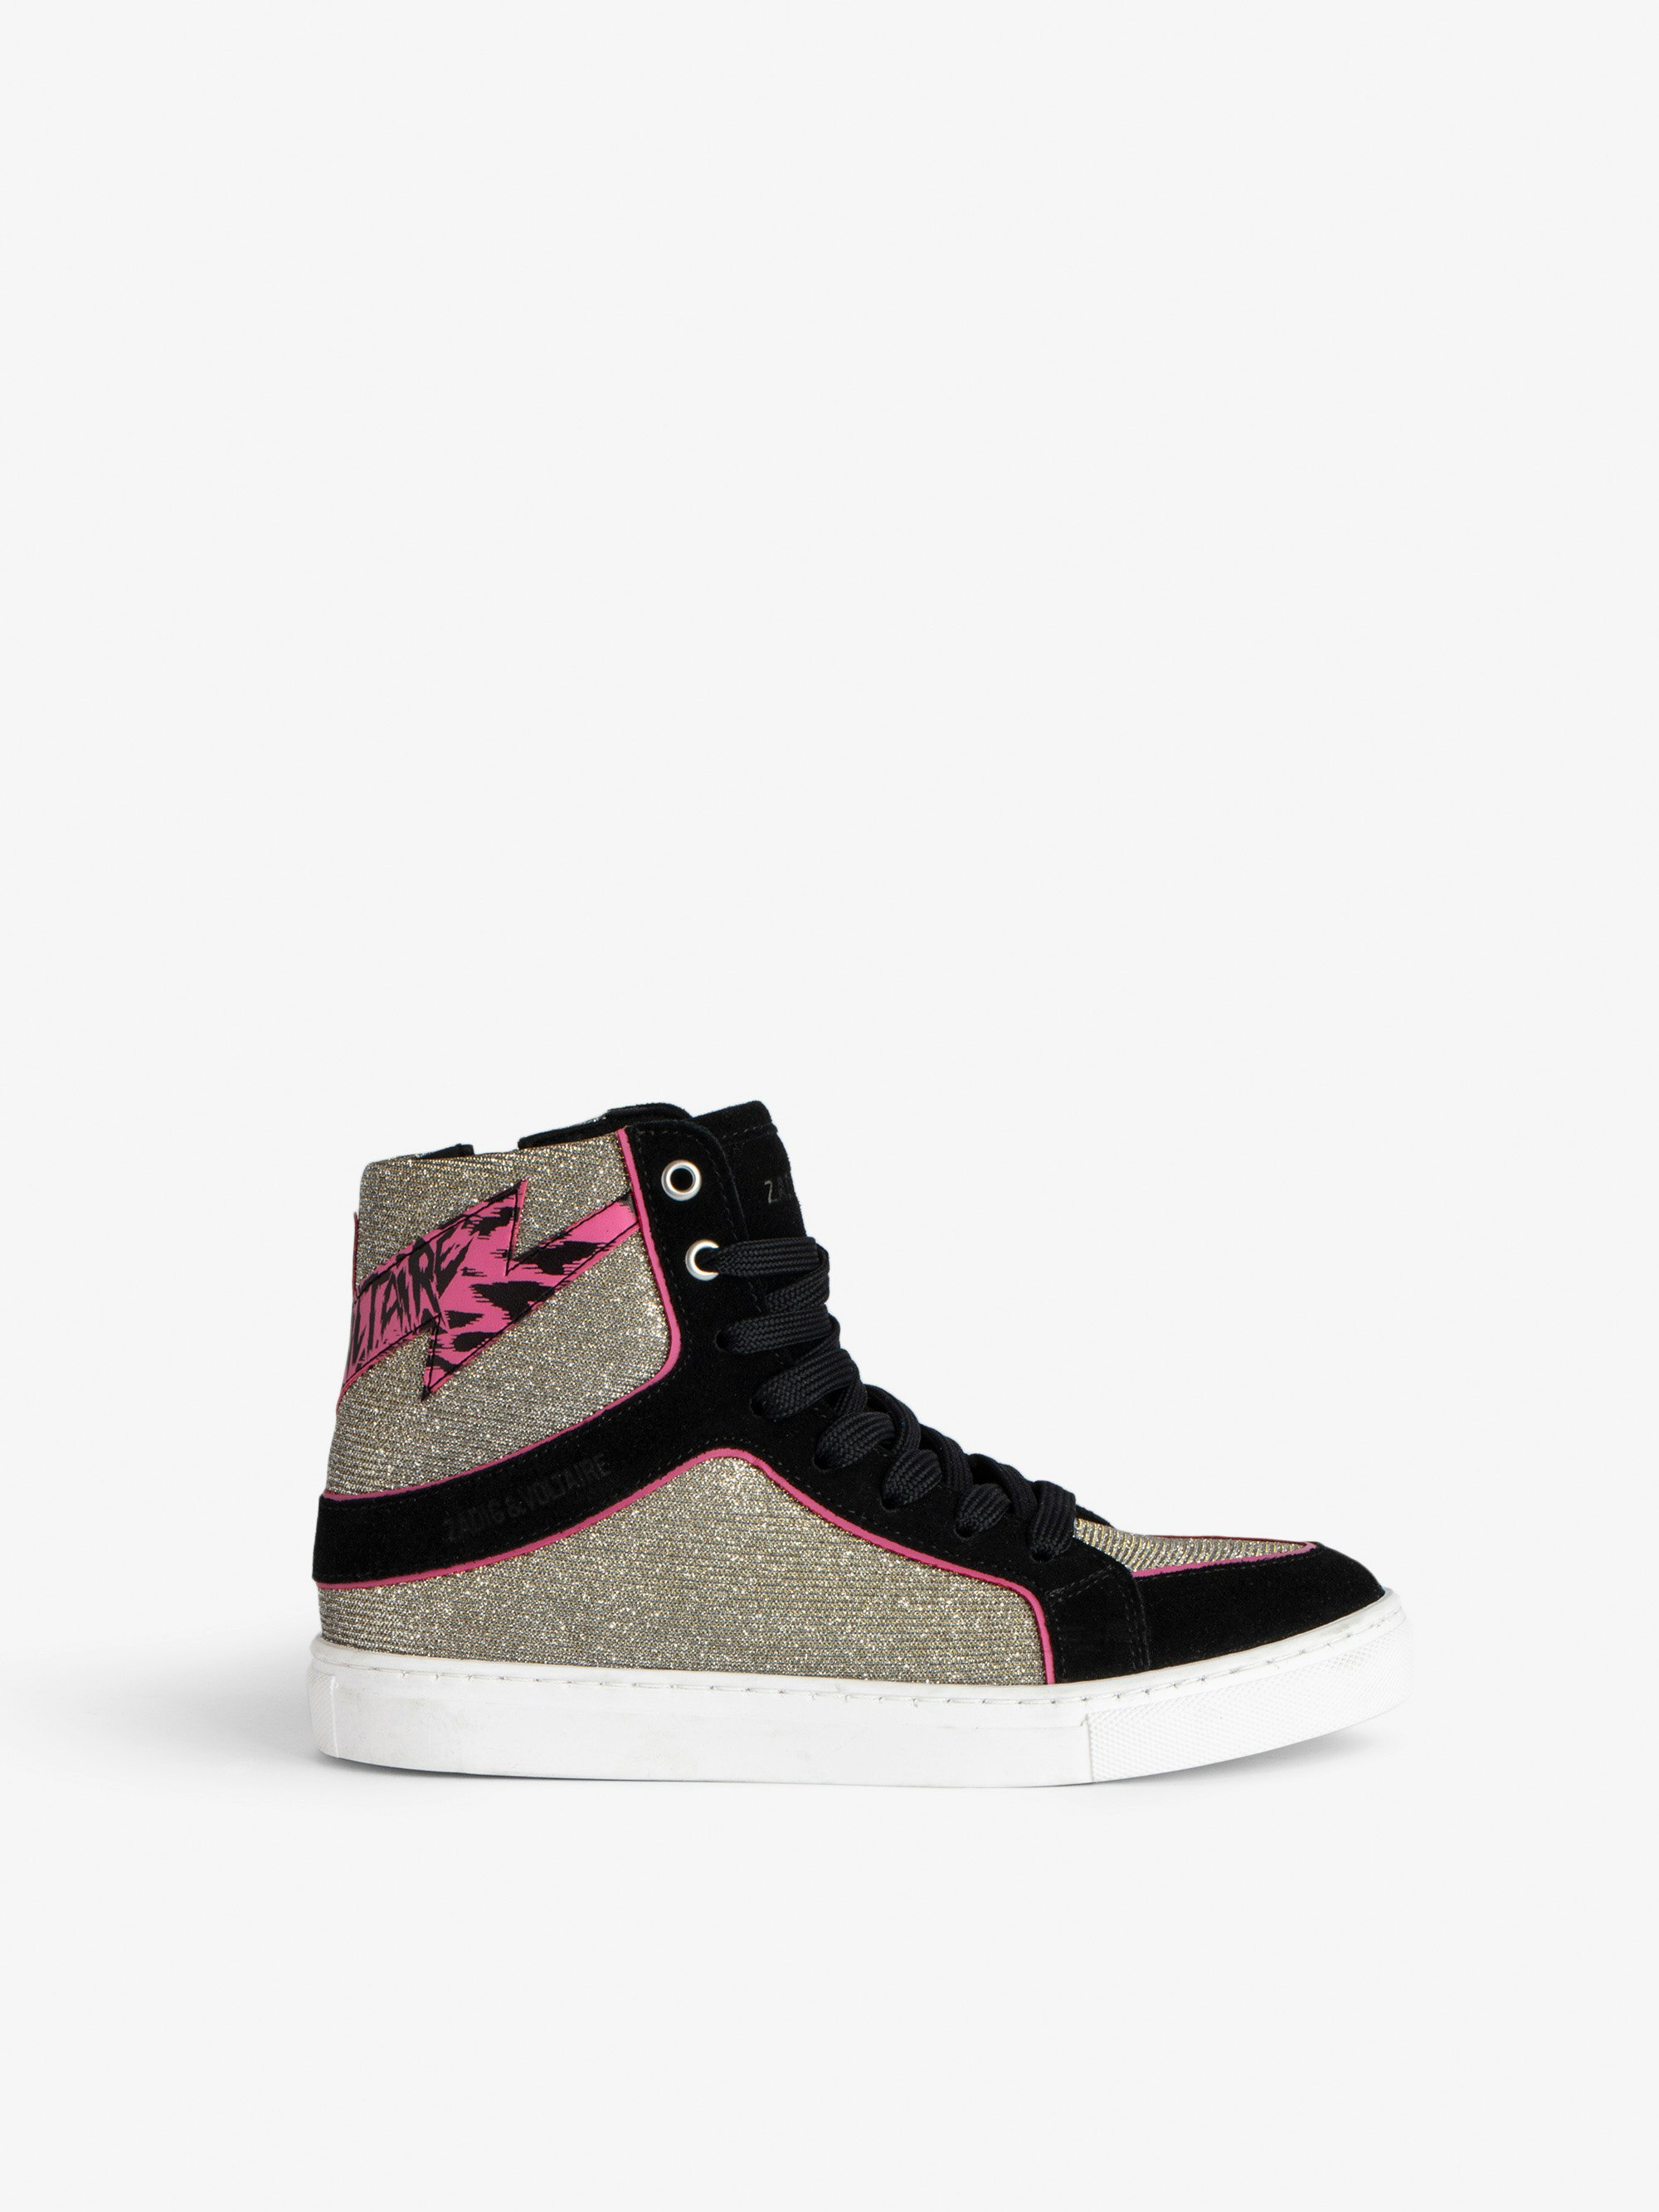 ZV1747 High Flash Girls’ High-Top Trainers - Girls’ black suede and glitter canvas high-top trainers with leopard-print lightning bolt..